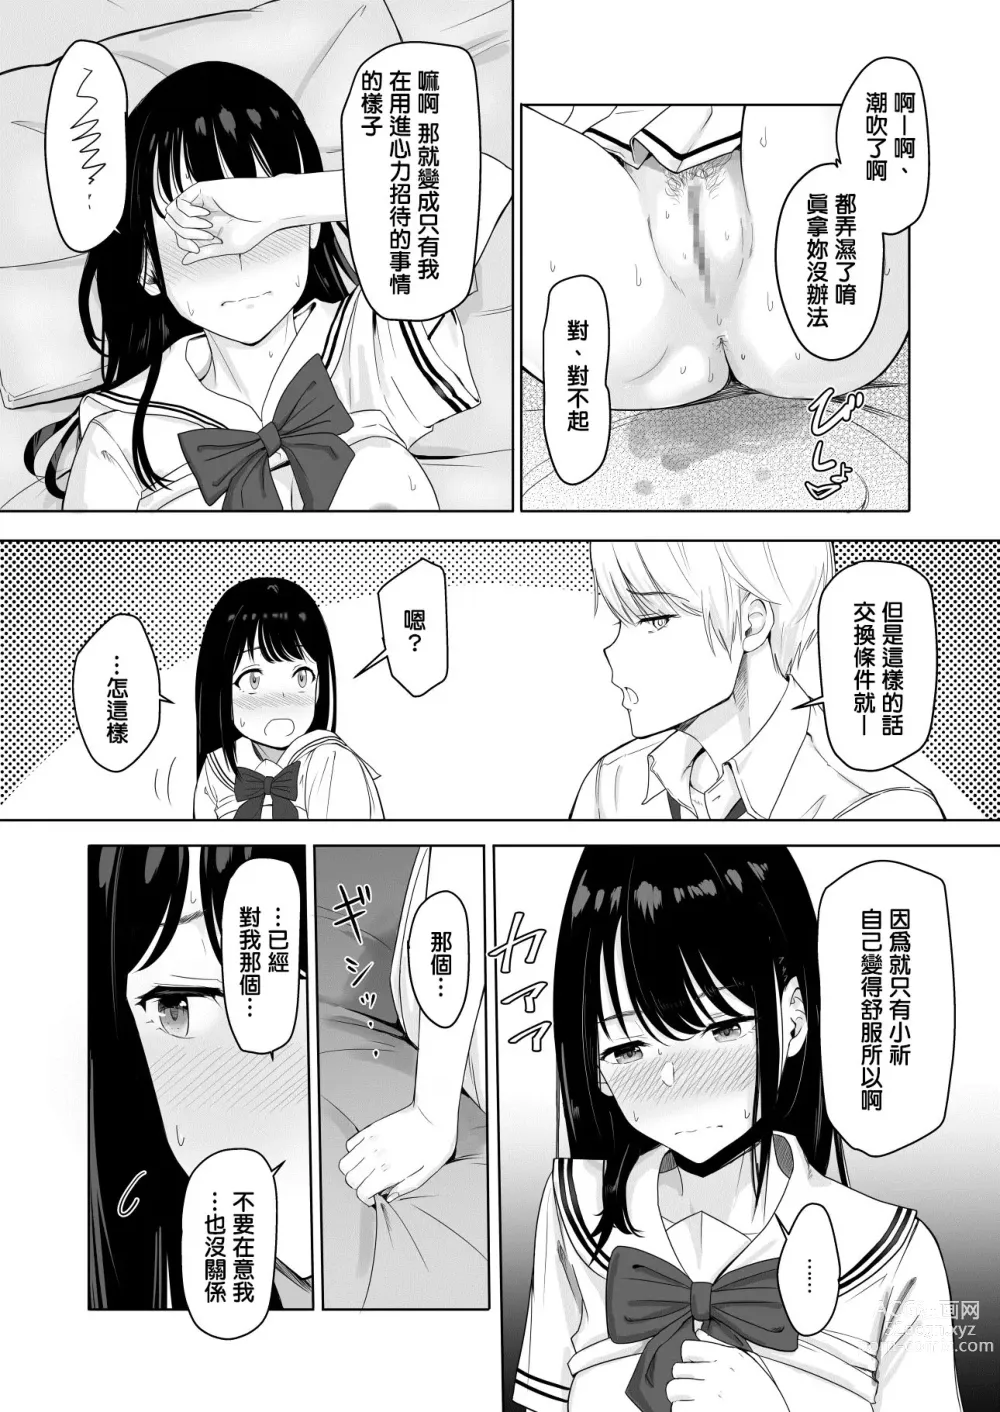 Page 48 of doujinshi For Your Sake.